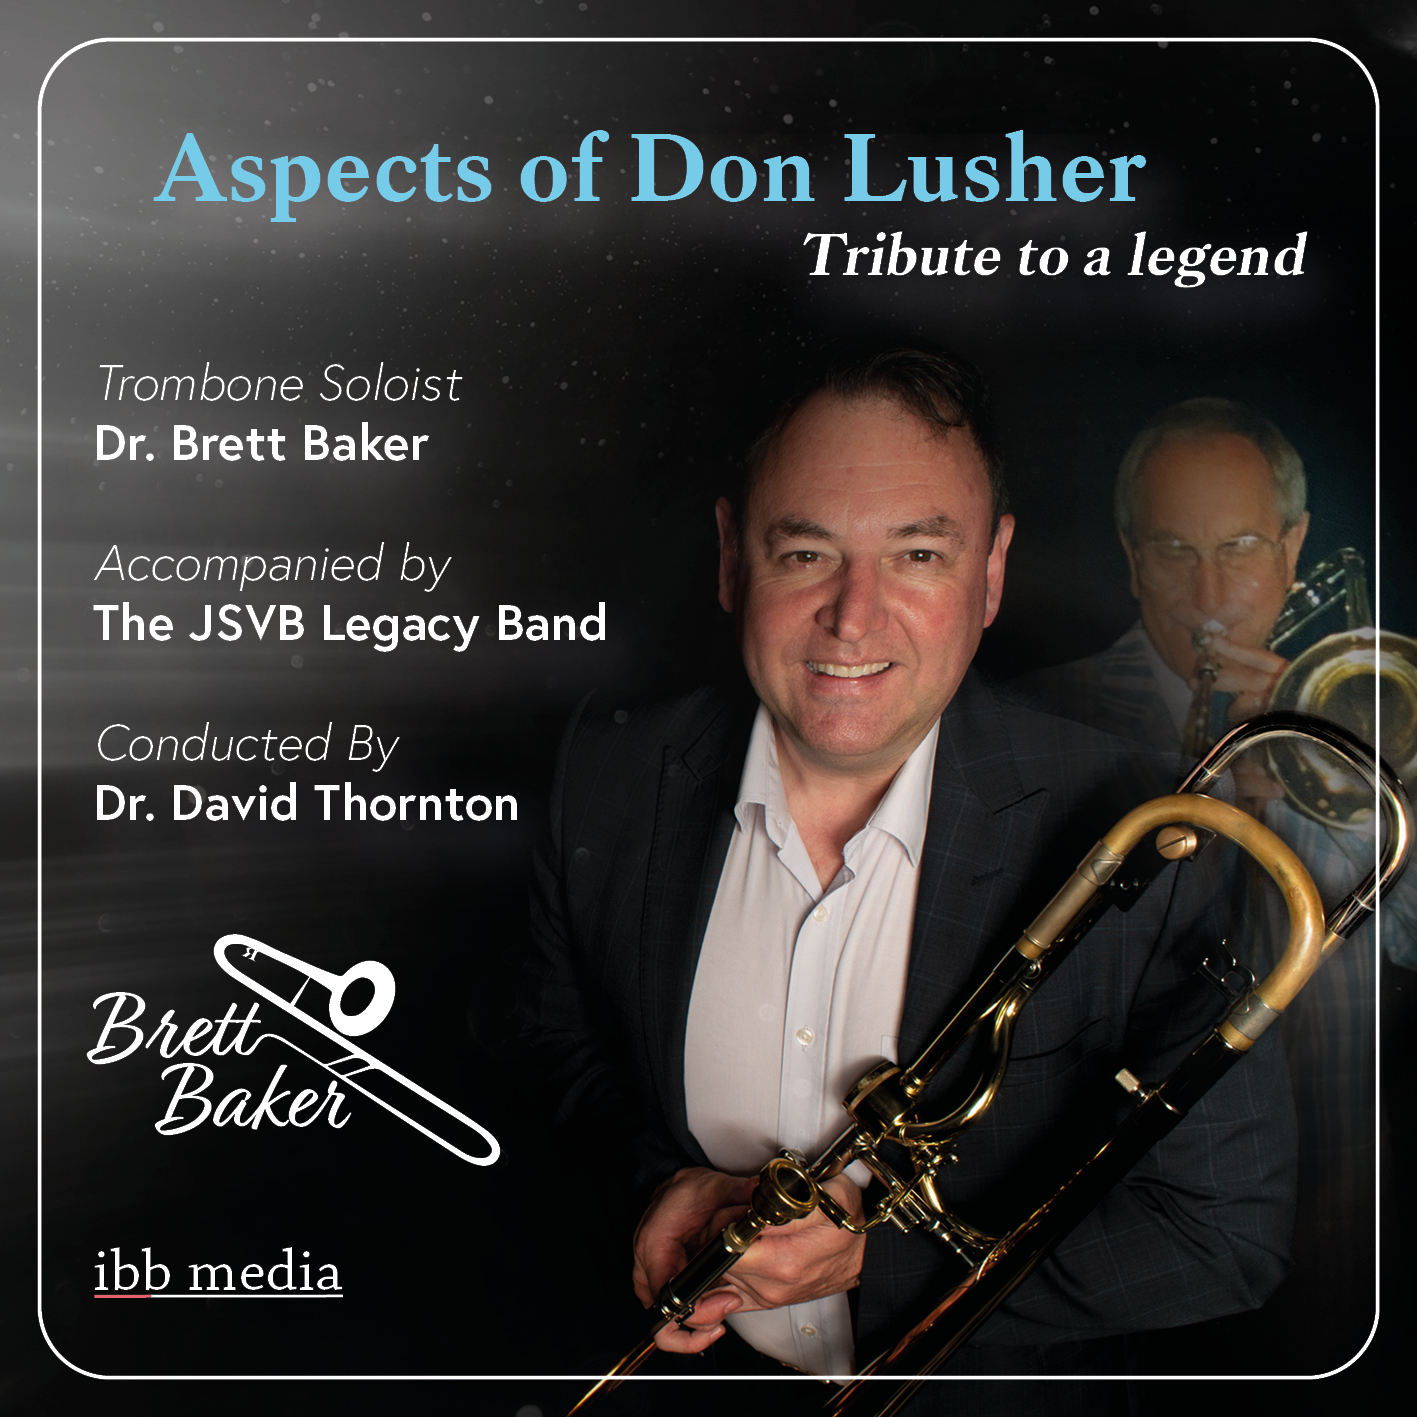 Aspects of Don Lusher